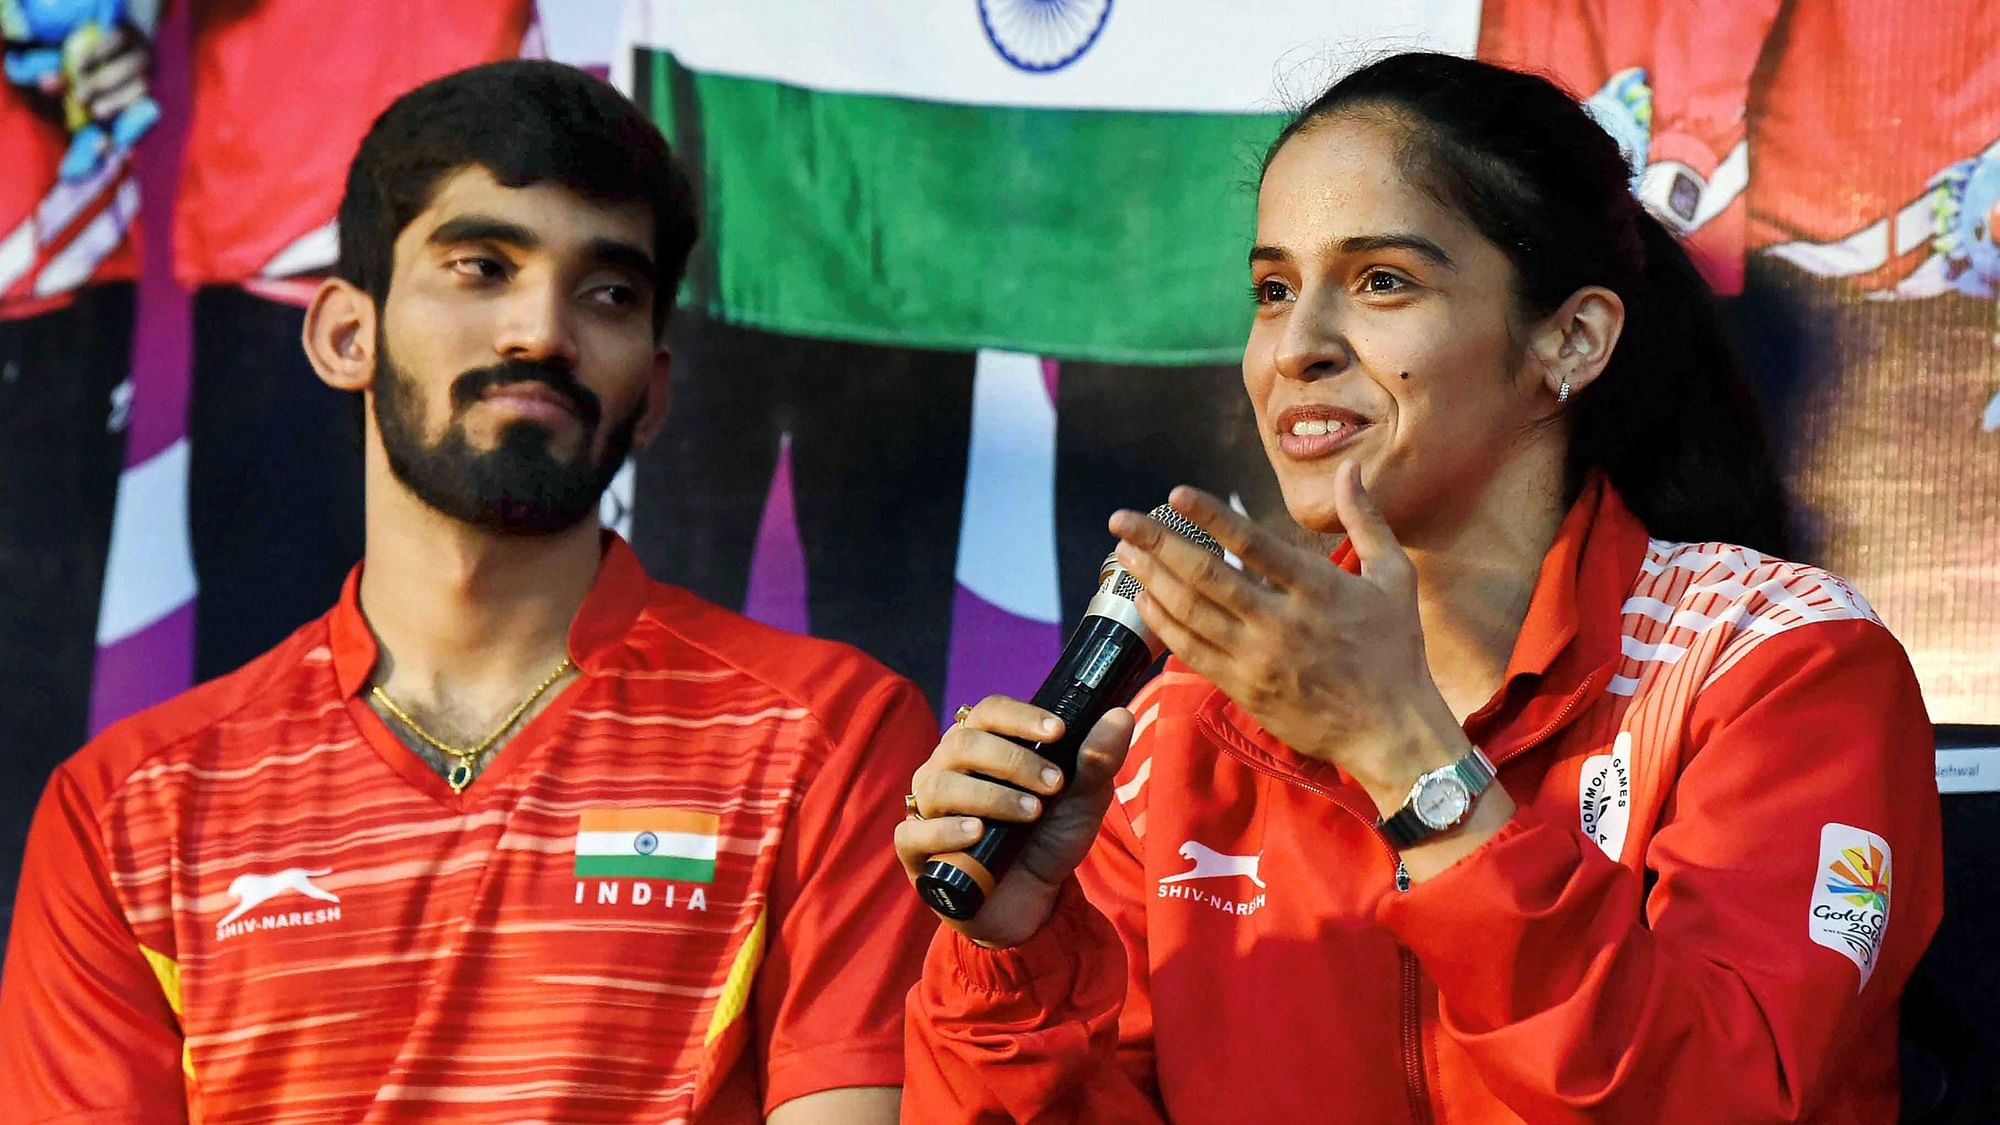 Saina Nehwal and Kidambi Srikanth will look to keep their Olympic hopes alive when they compete at the USD 170,000 Barcelona Spain Masters starting on Tuesday, 18 February.